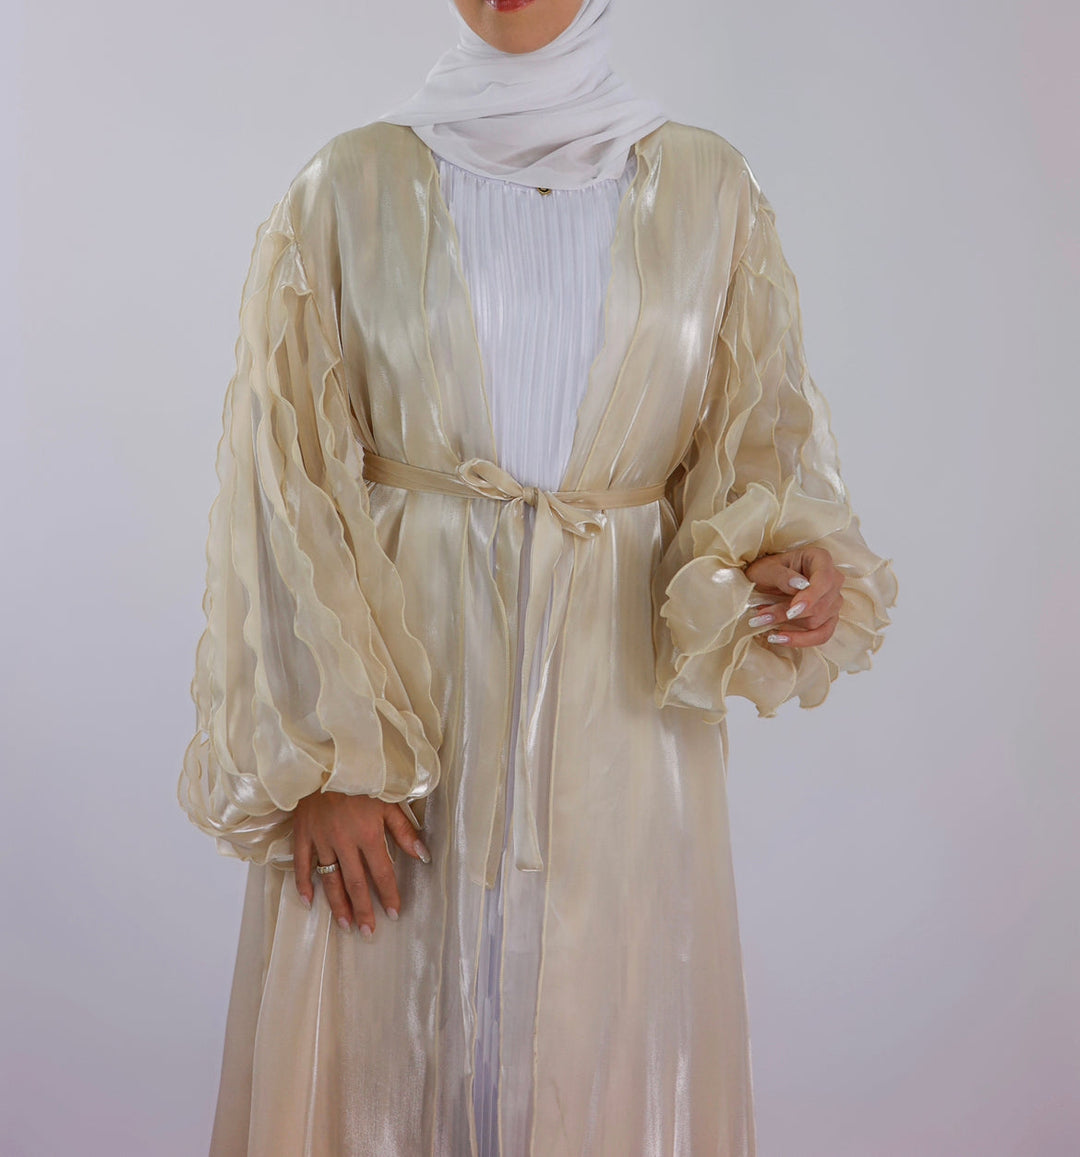 Get trendy with Bella 2-Piece Abaya Set - Buttermilk - Dresses available at Voilee NY. Grab yours for $120 today!